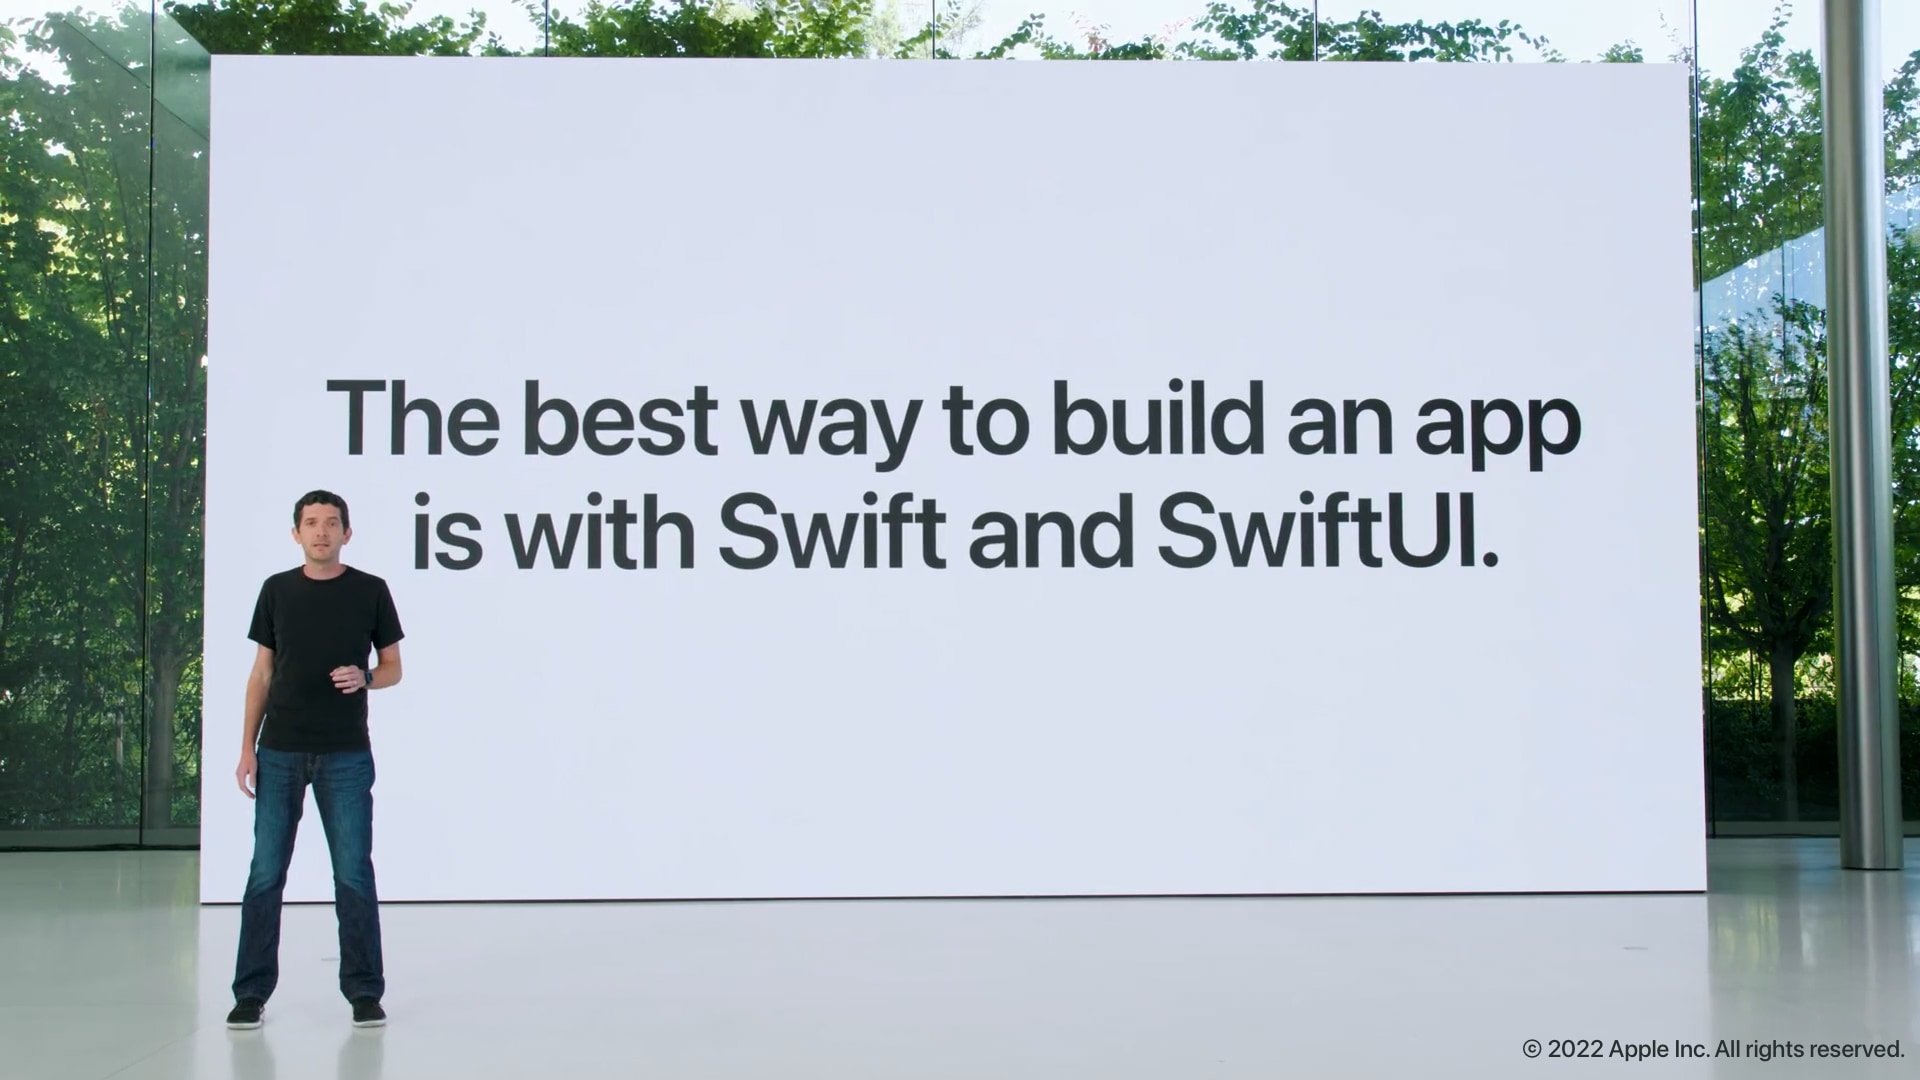 The best way to build an app is with Swift and SwiftUI